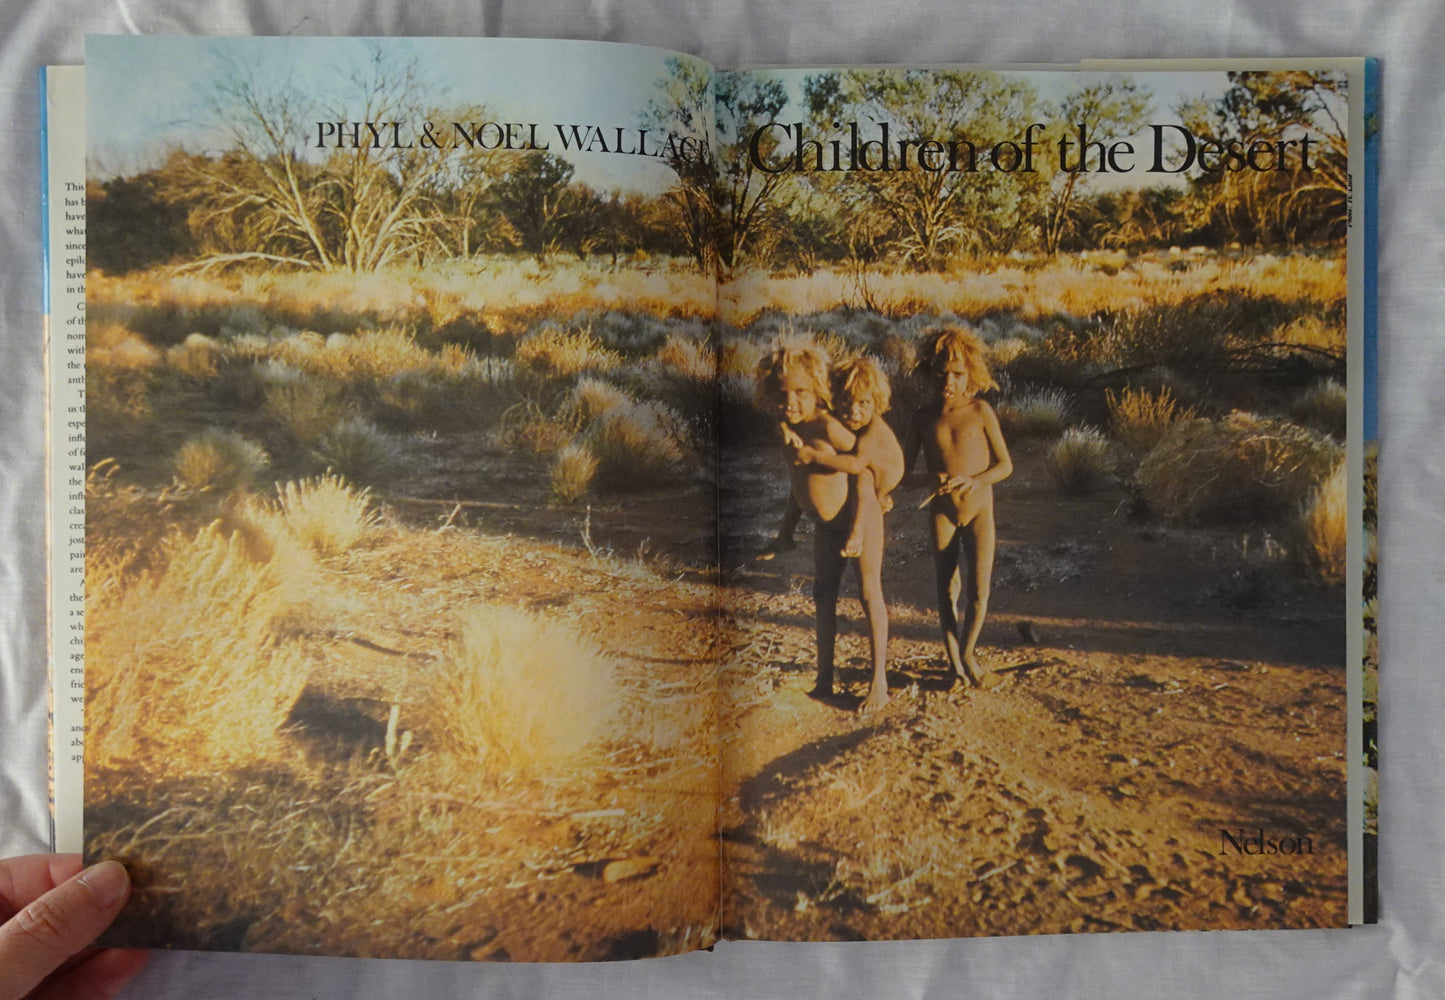 Children of the Desert by Phyl and Noel Wallace